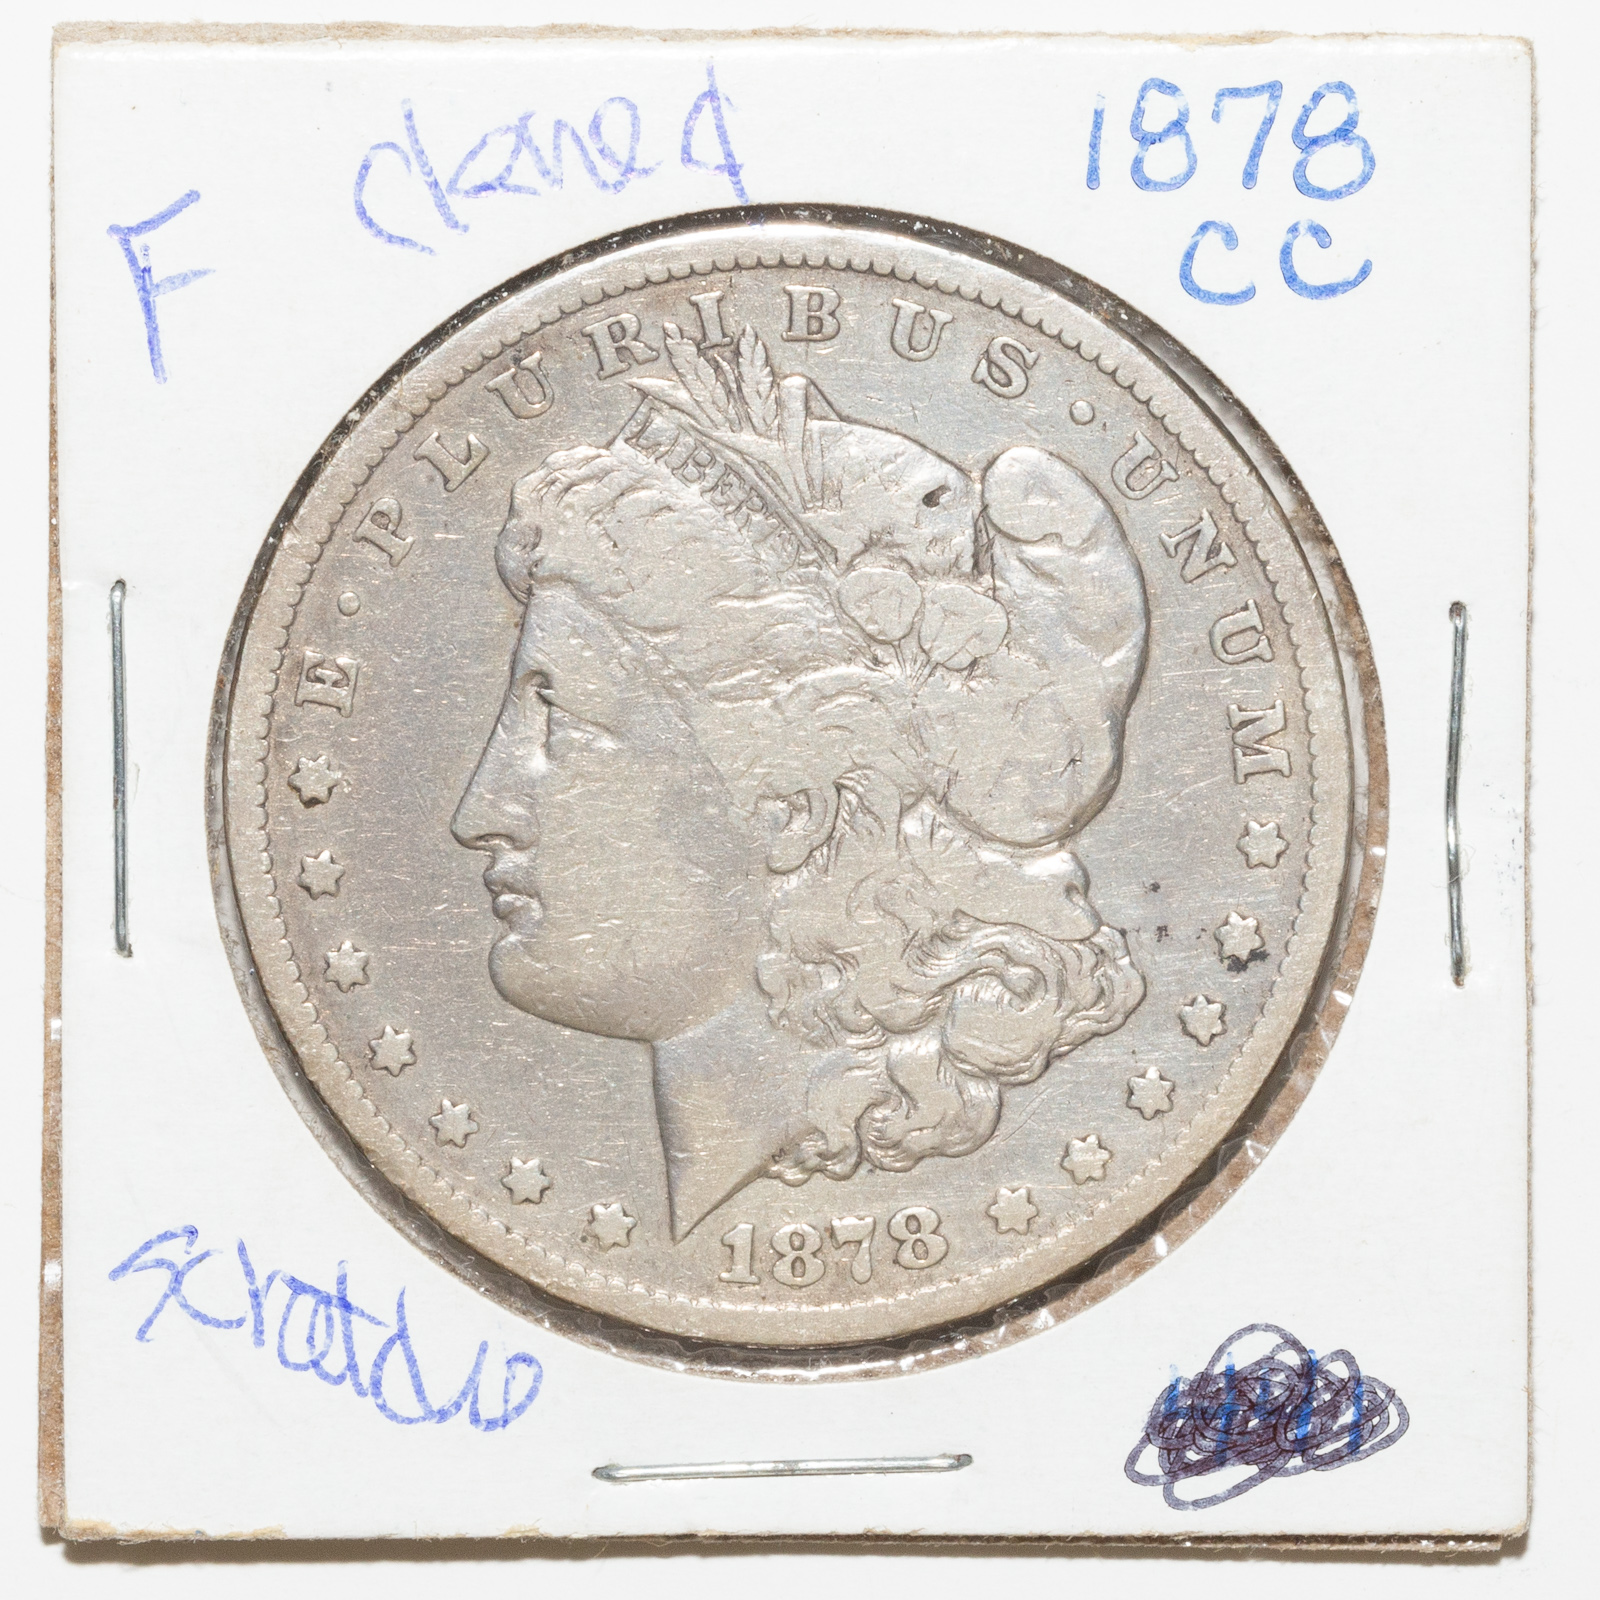 1878-CC MORGAN FINE, CLEANED, SCRATCHES